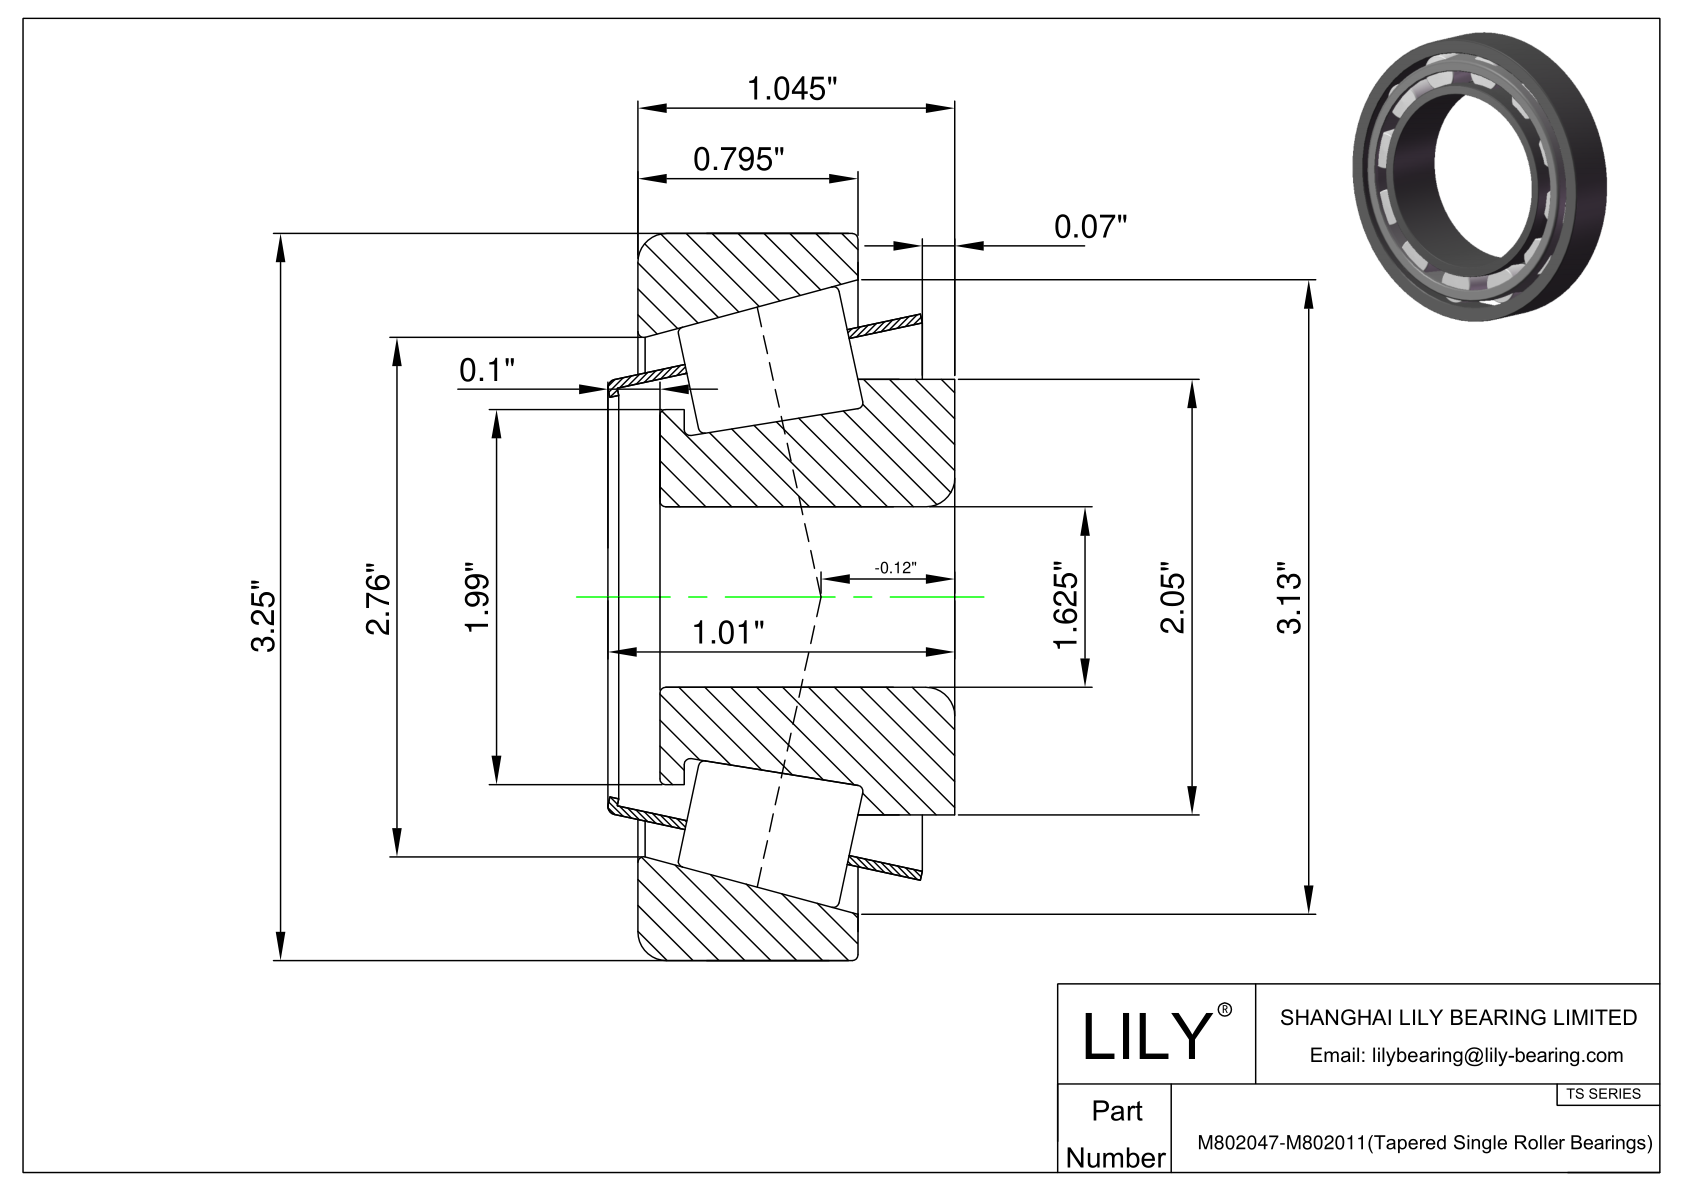 M802047-M802011 TS (Tapered Single Roller Bearings) (Imperial) cad drawing